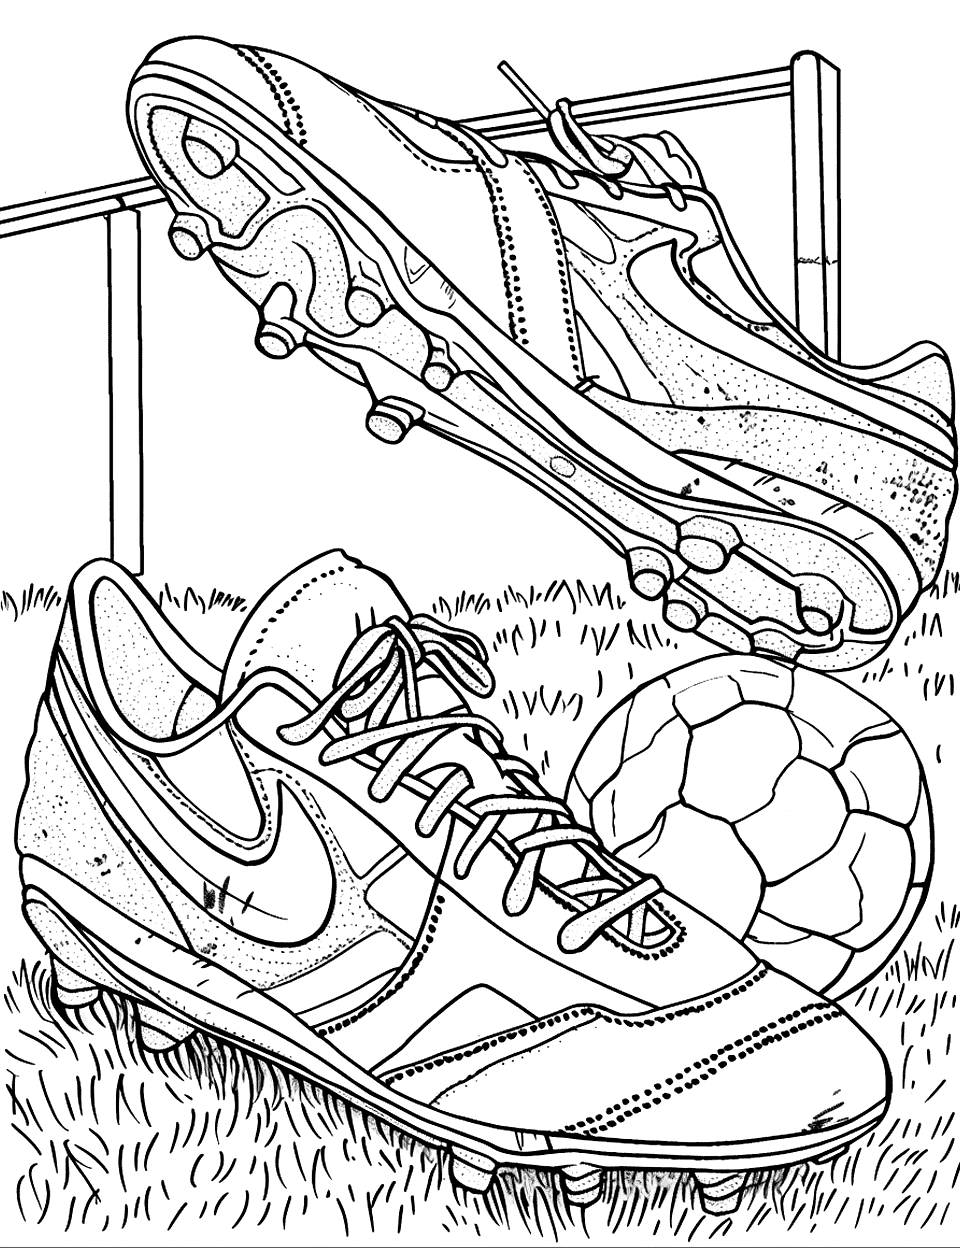 Soccer Cleats After the Game Shoe Coloring Page - Muddy soccer cleats with a soccer ball, placed on a grass field.